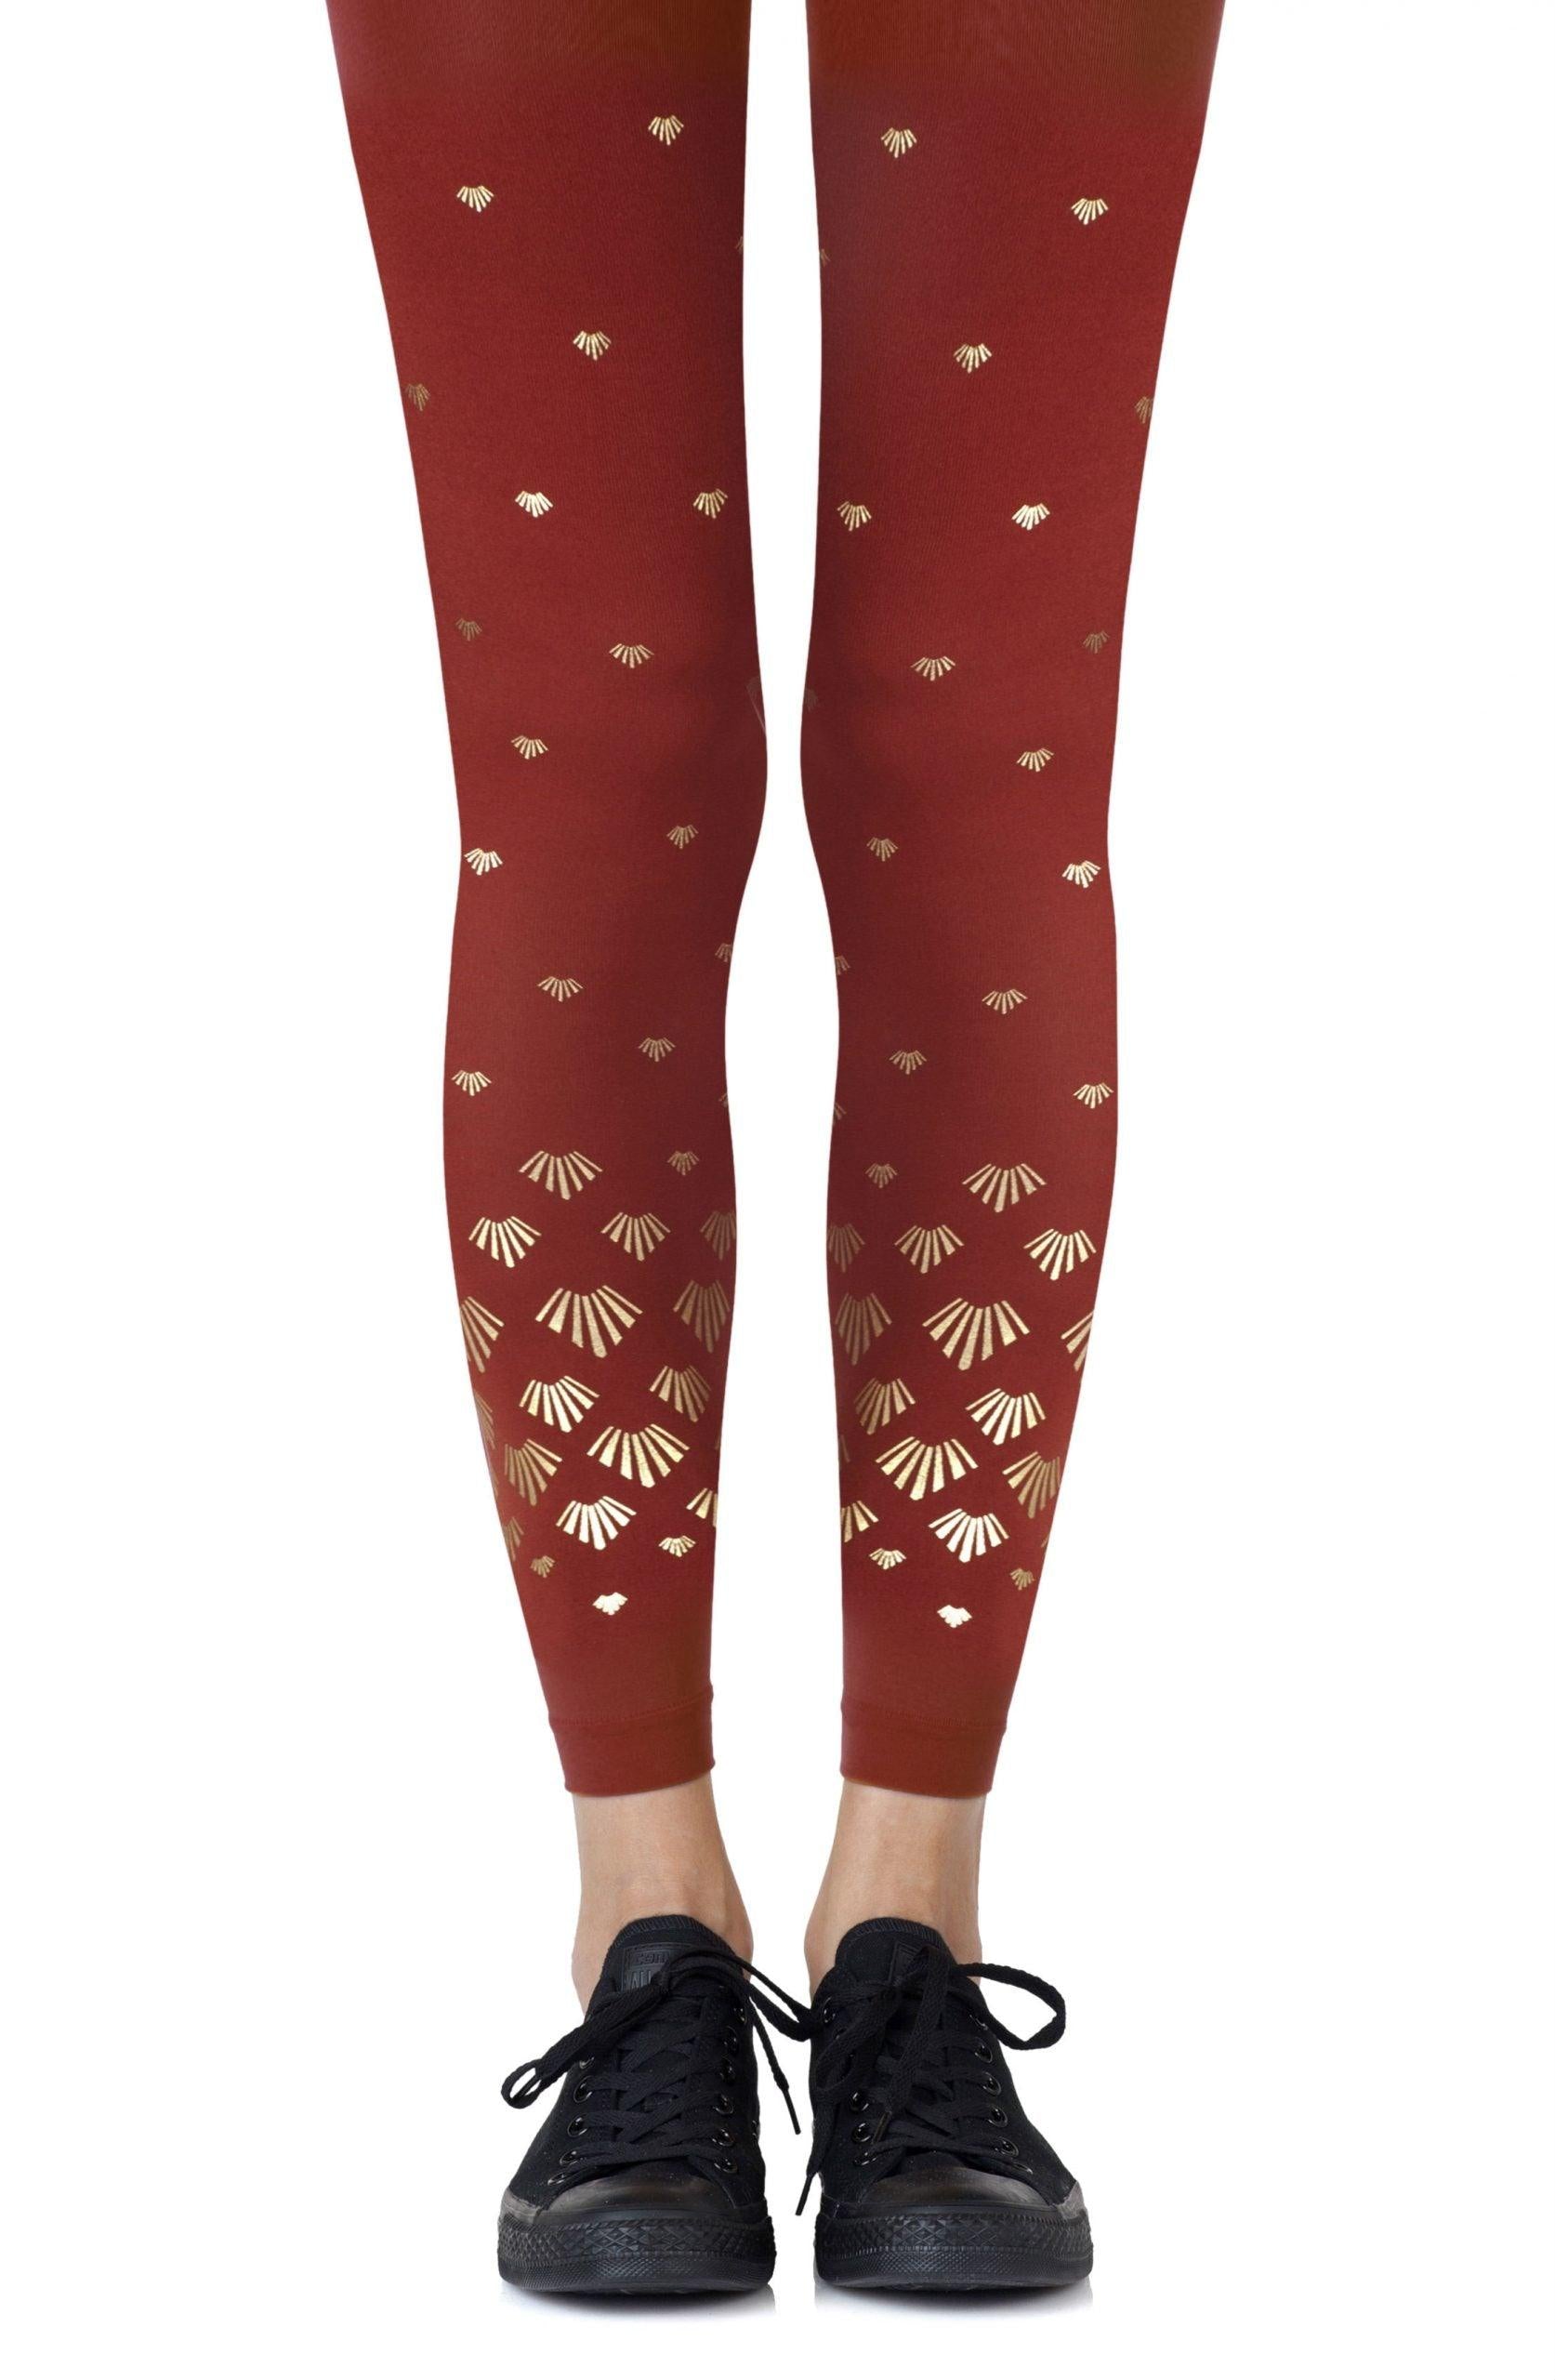 Zohara "Shell Out" Rust Footless Tights - Sydney Rose Lingerie 